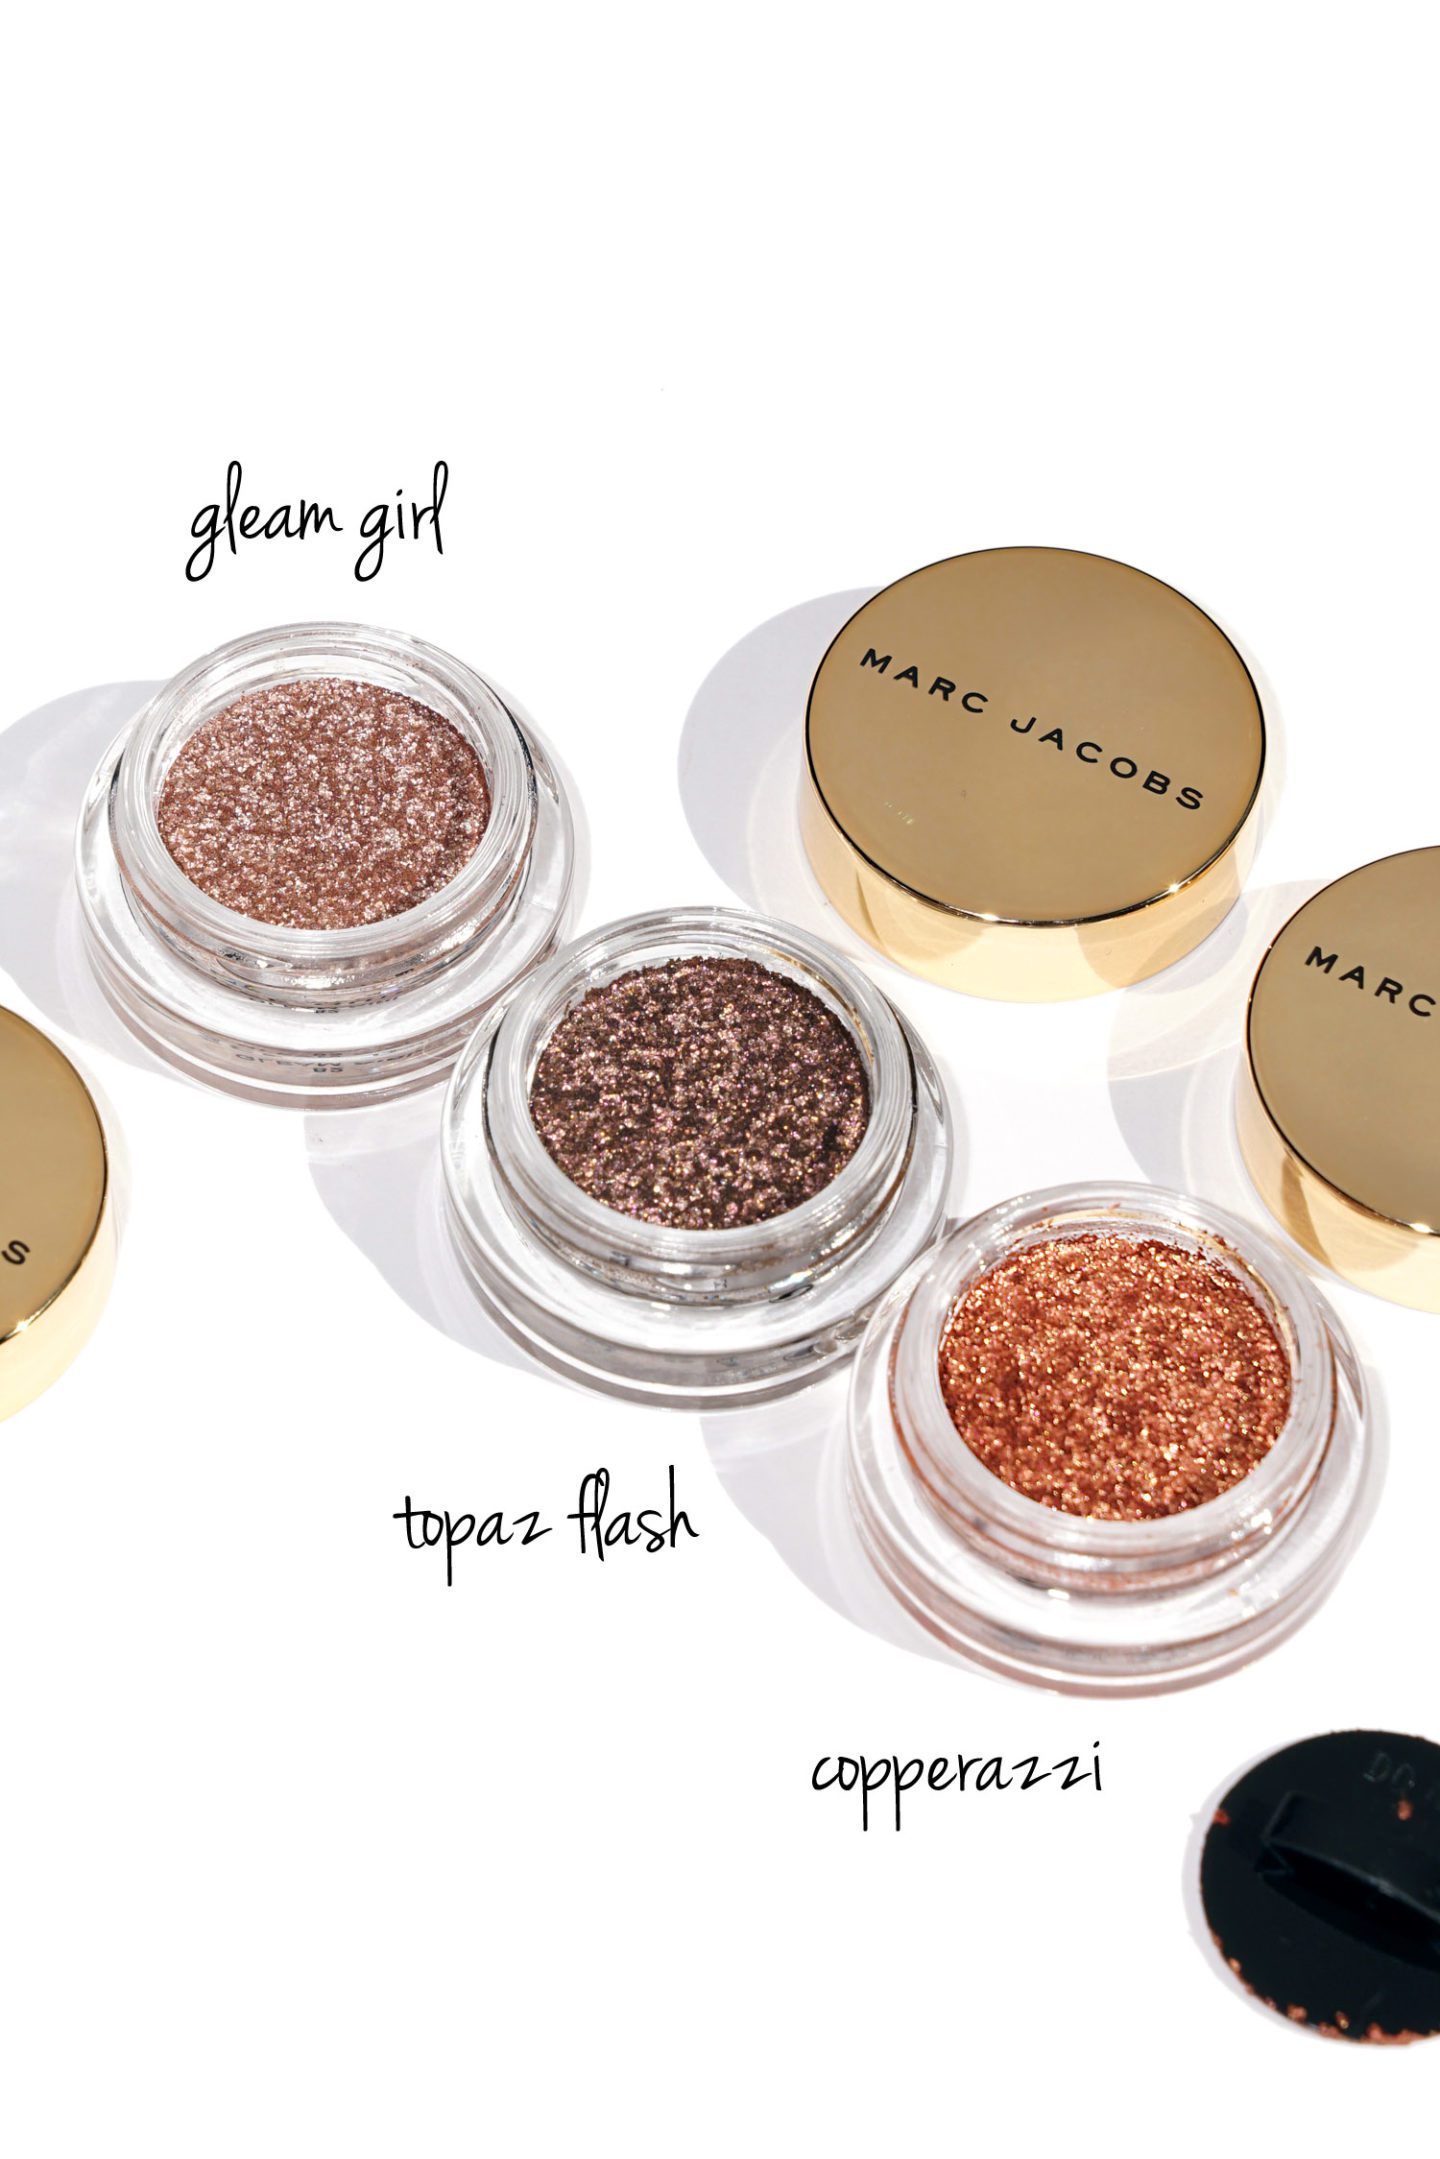 Marc Jacobs Beauty See-Quins Glam Glitter Eyeshadow review and swatches